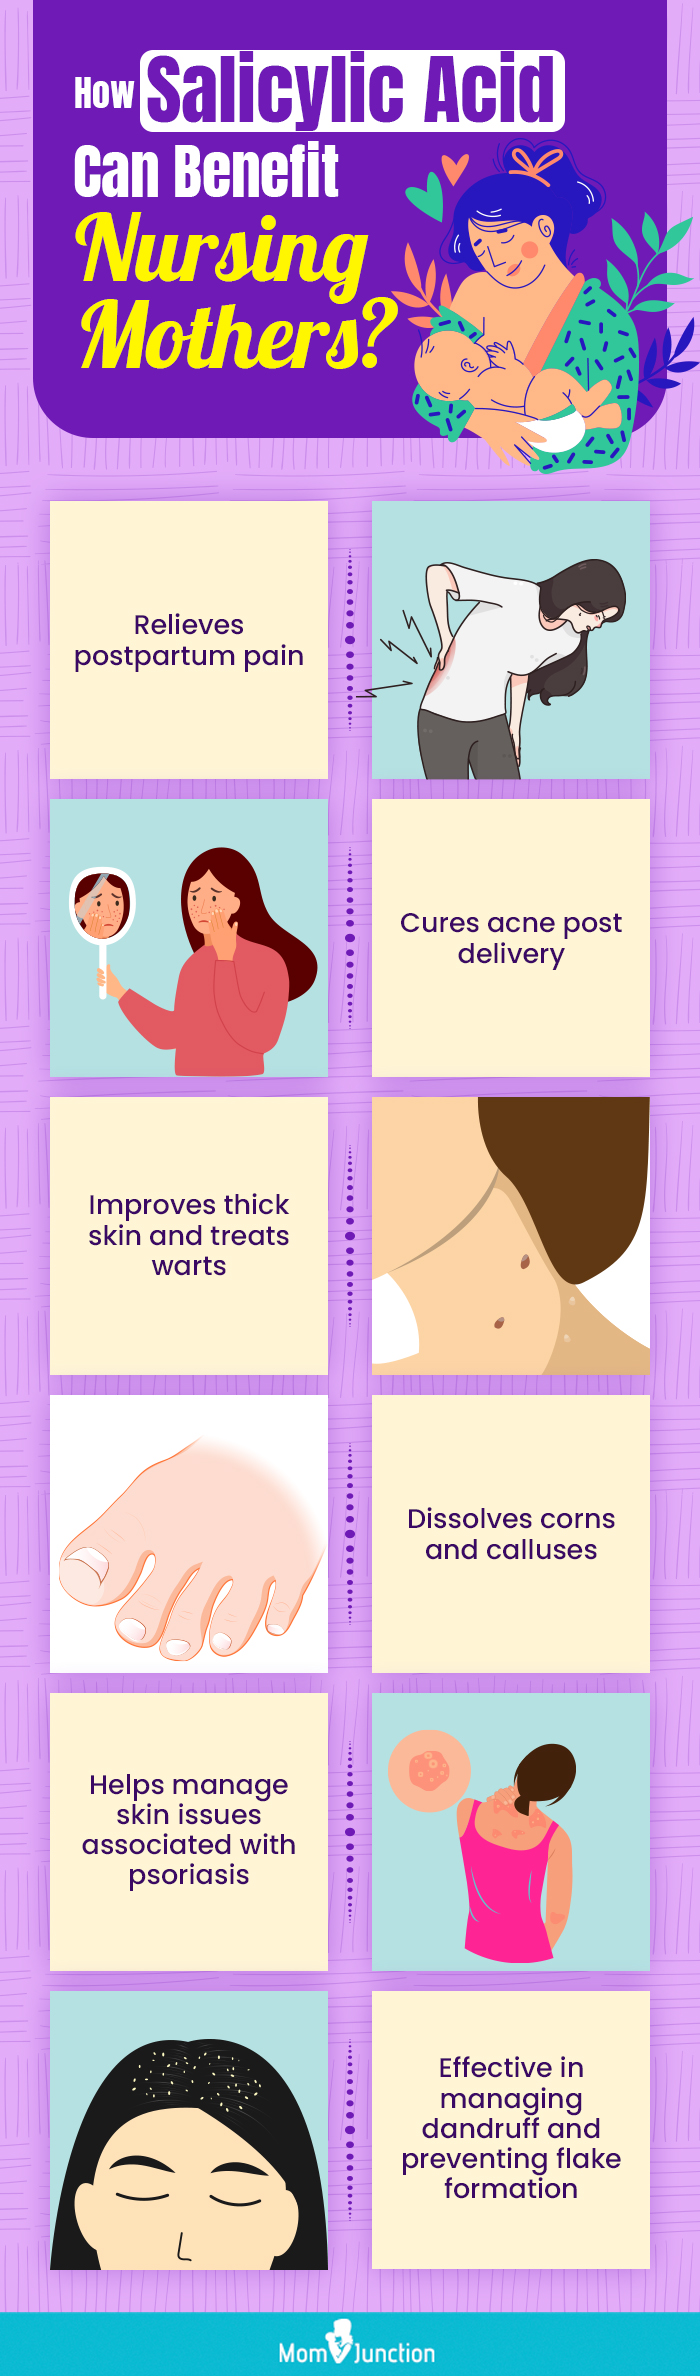 how salicylic acid can benefit nursing mothers (infographic)